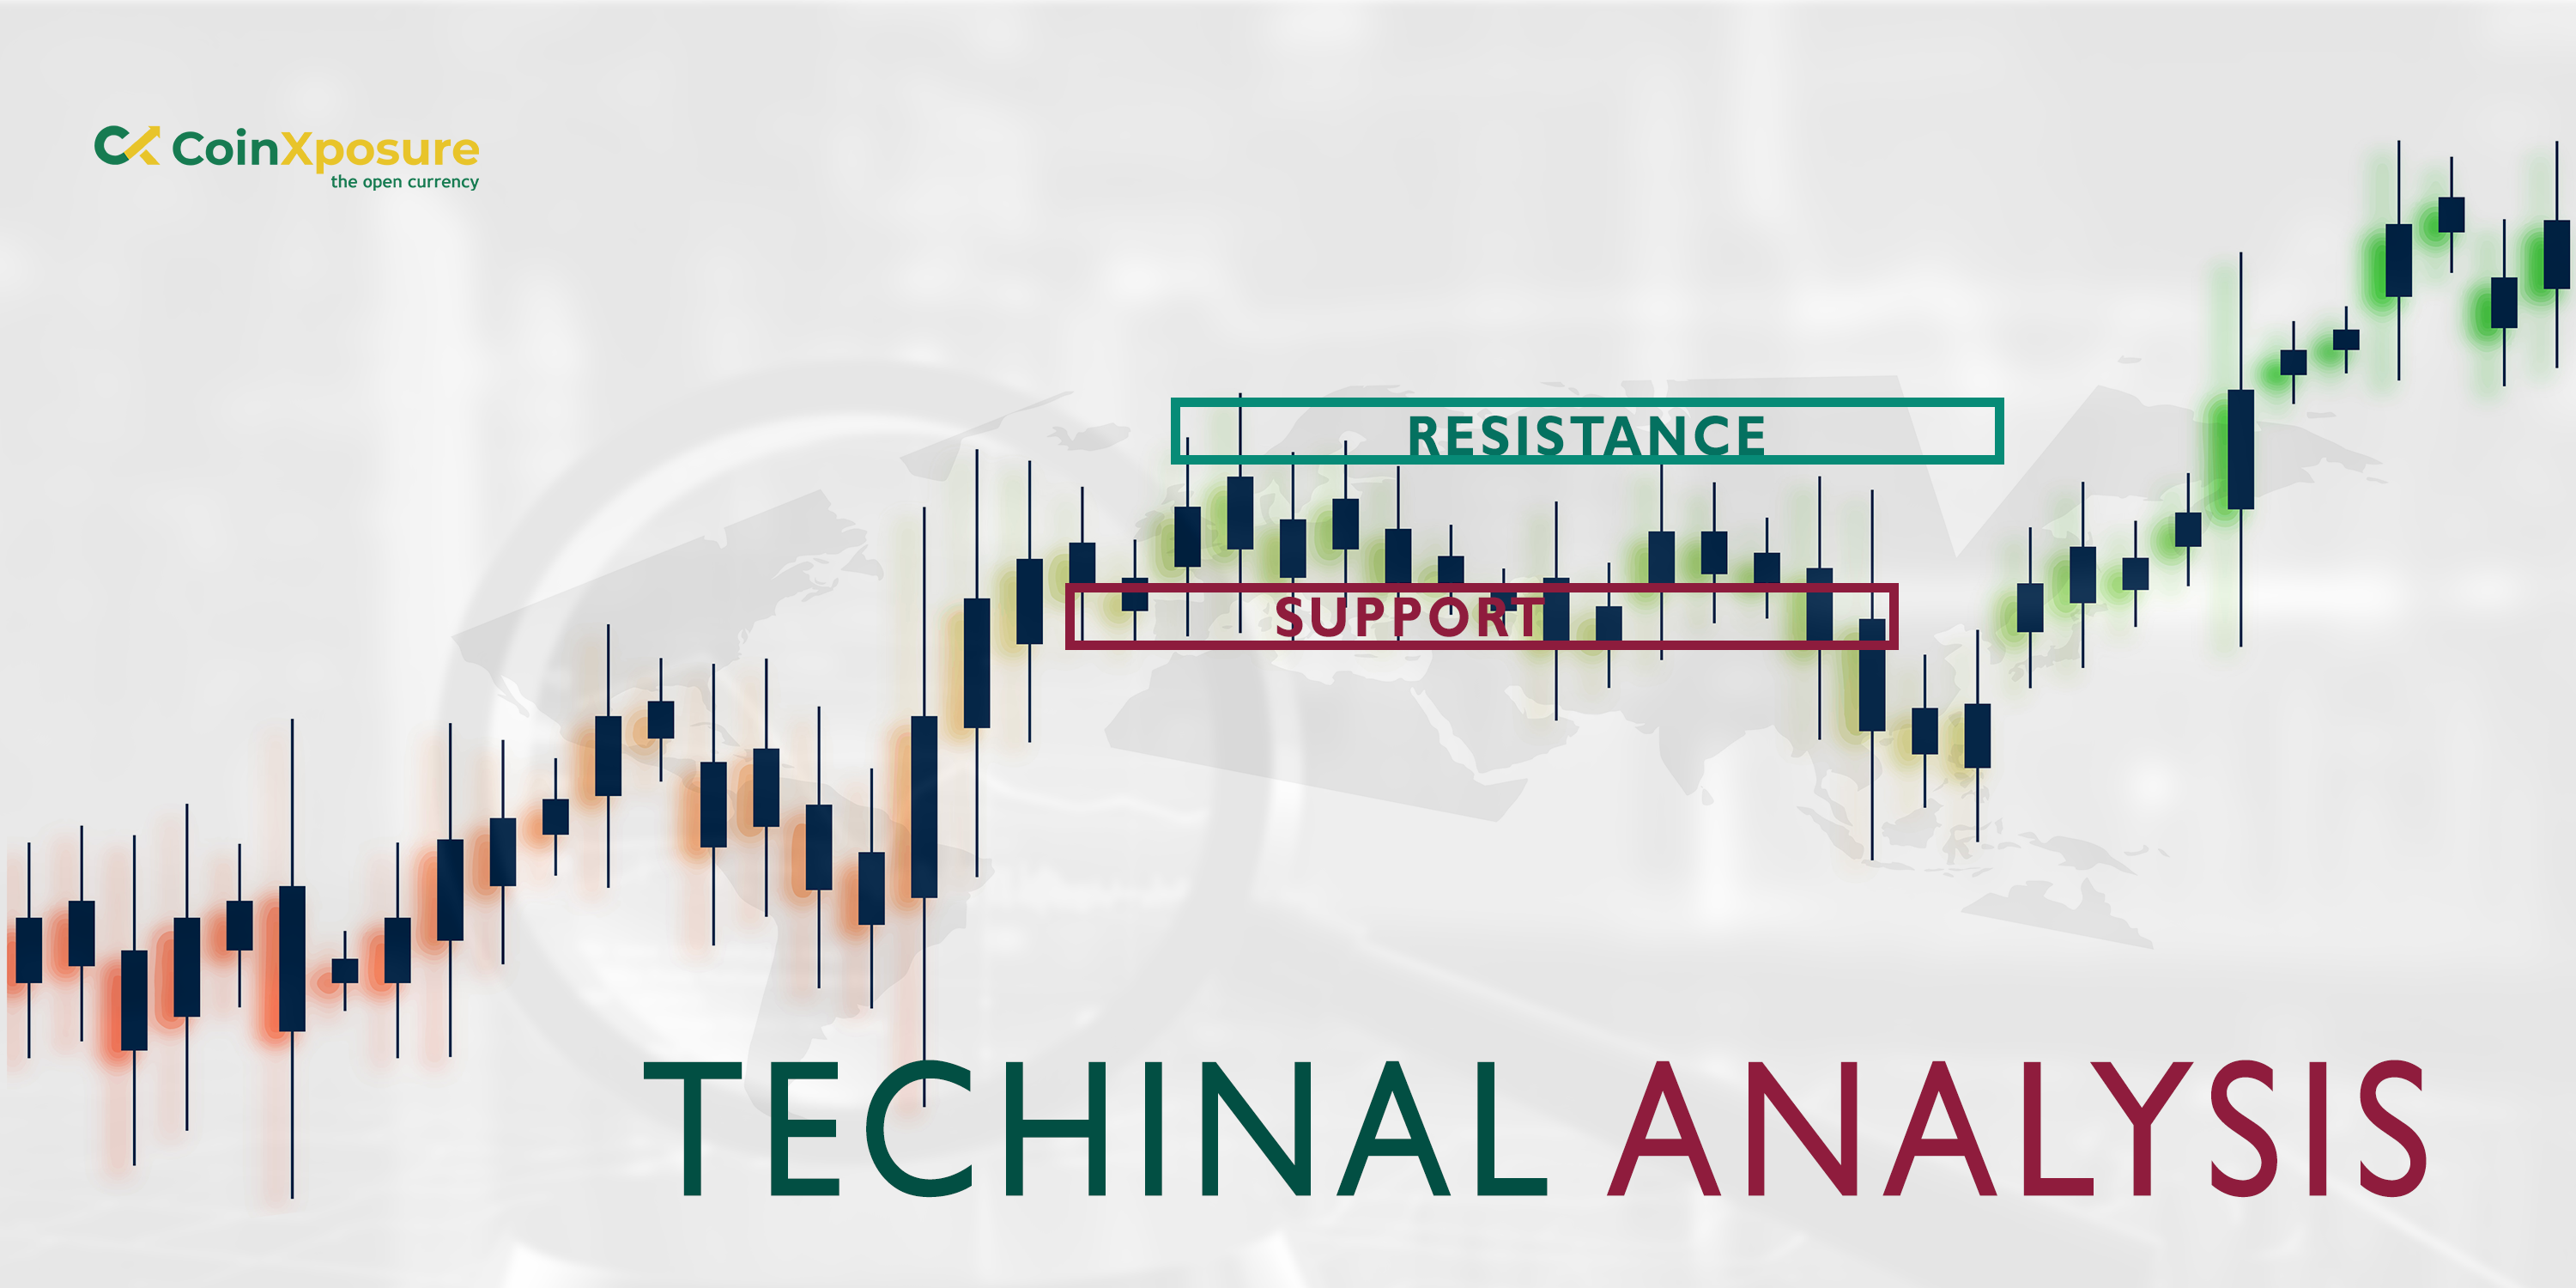 HOW TO USE TECHNICAL ANALYSIS IN CRYPYO TRADING